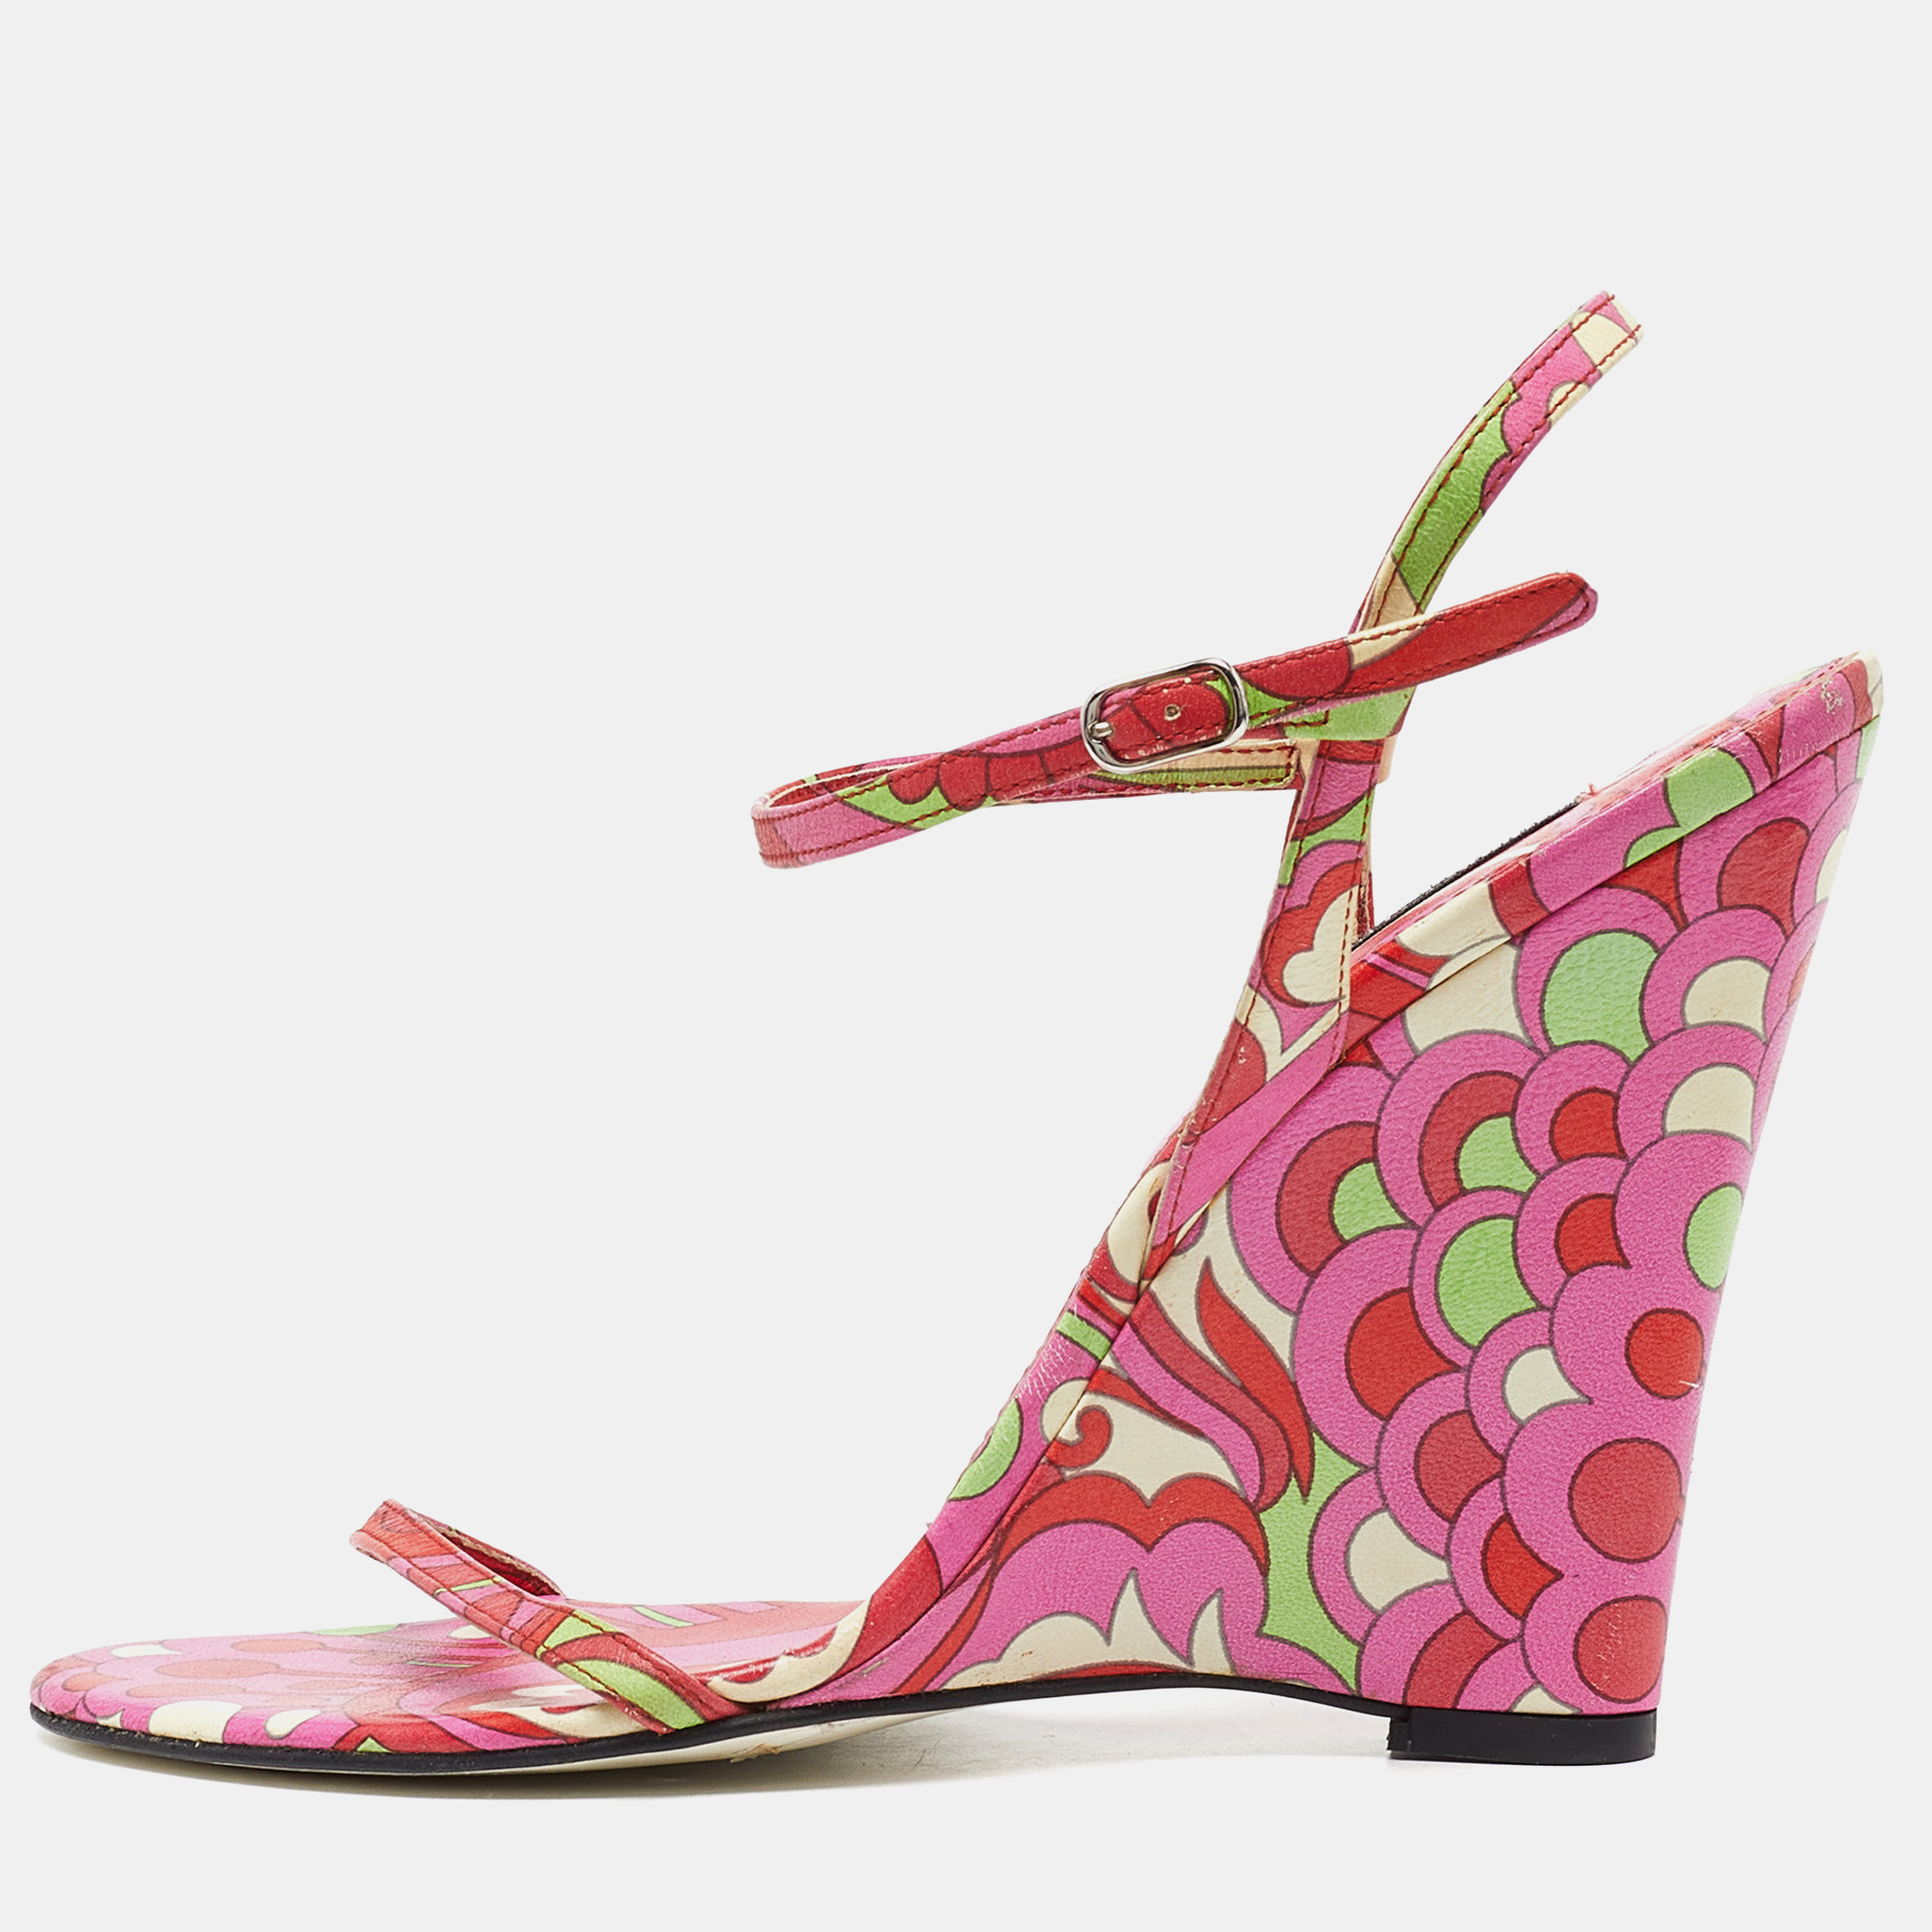 

Dolce & Gabbana Multicolor Print Leather Wedge Sandals Size